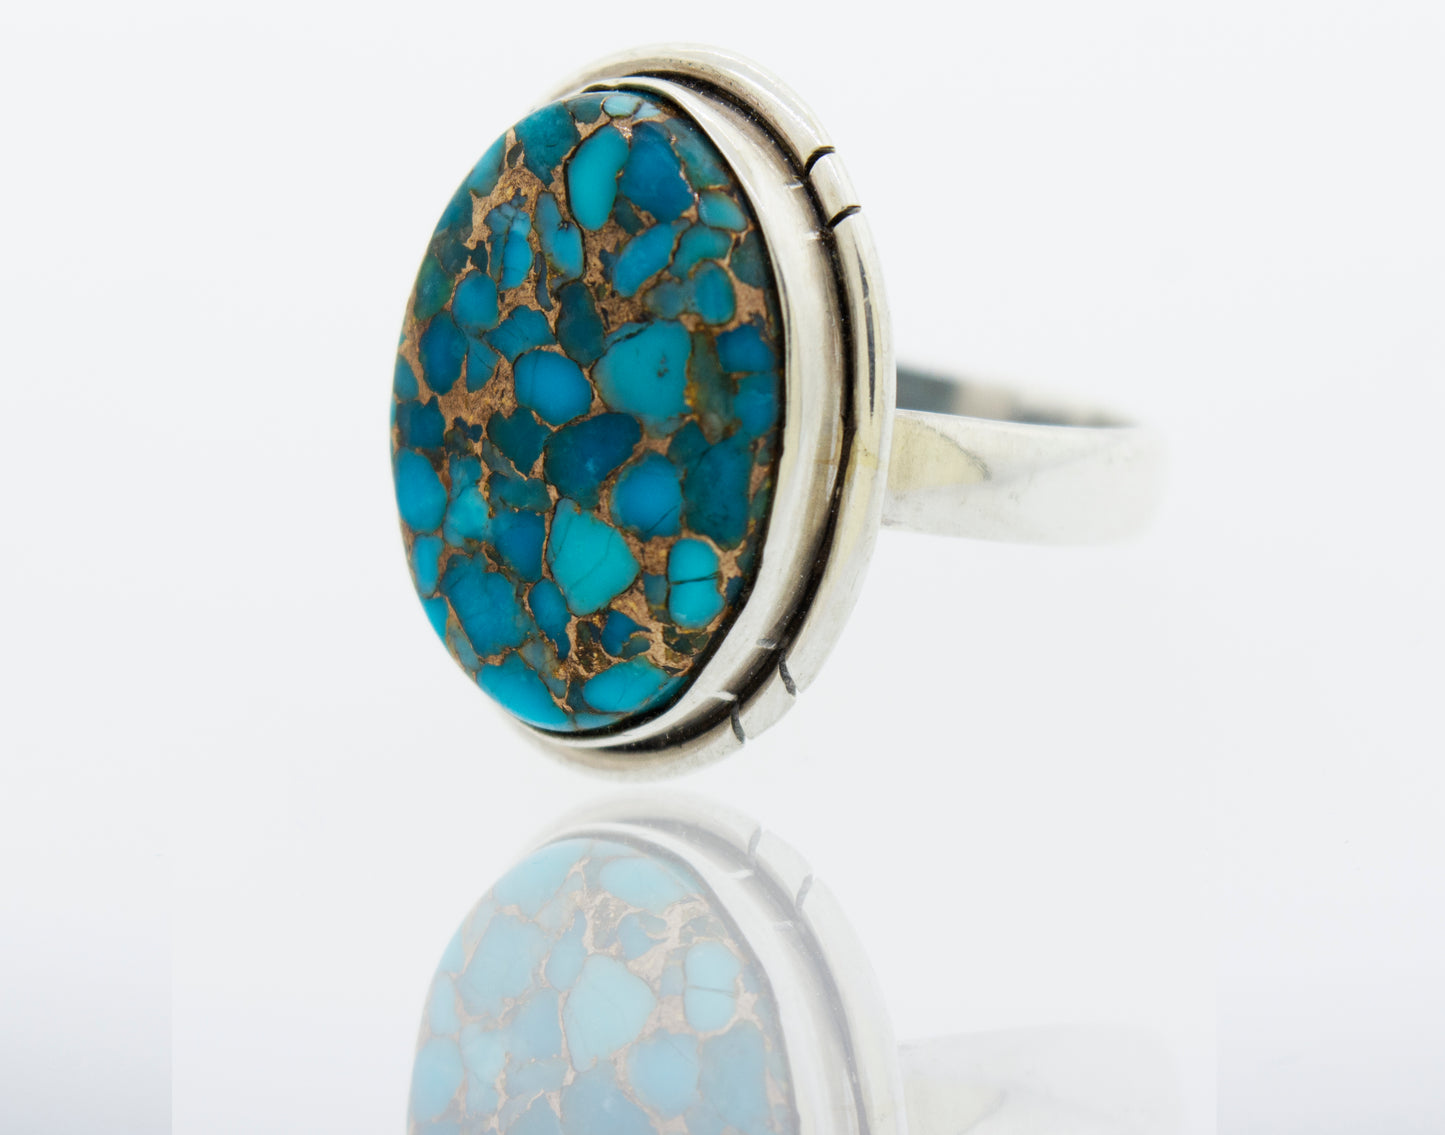 Description: An oval Natural Blue Copper Turquoise stone ring in sterling silver by Super Silver.